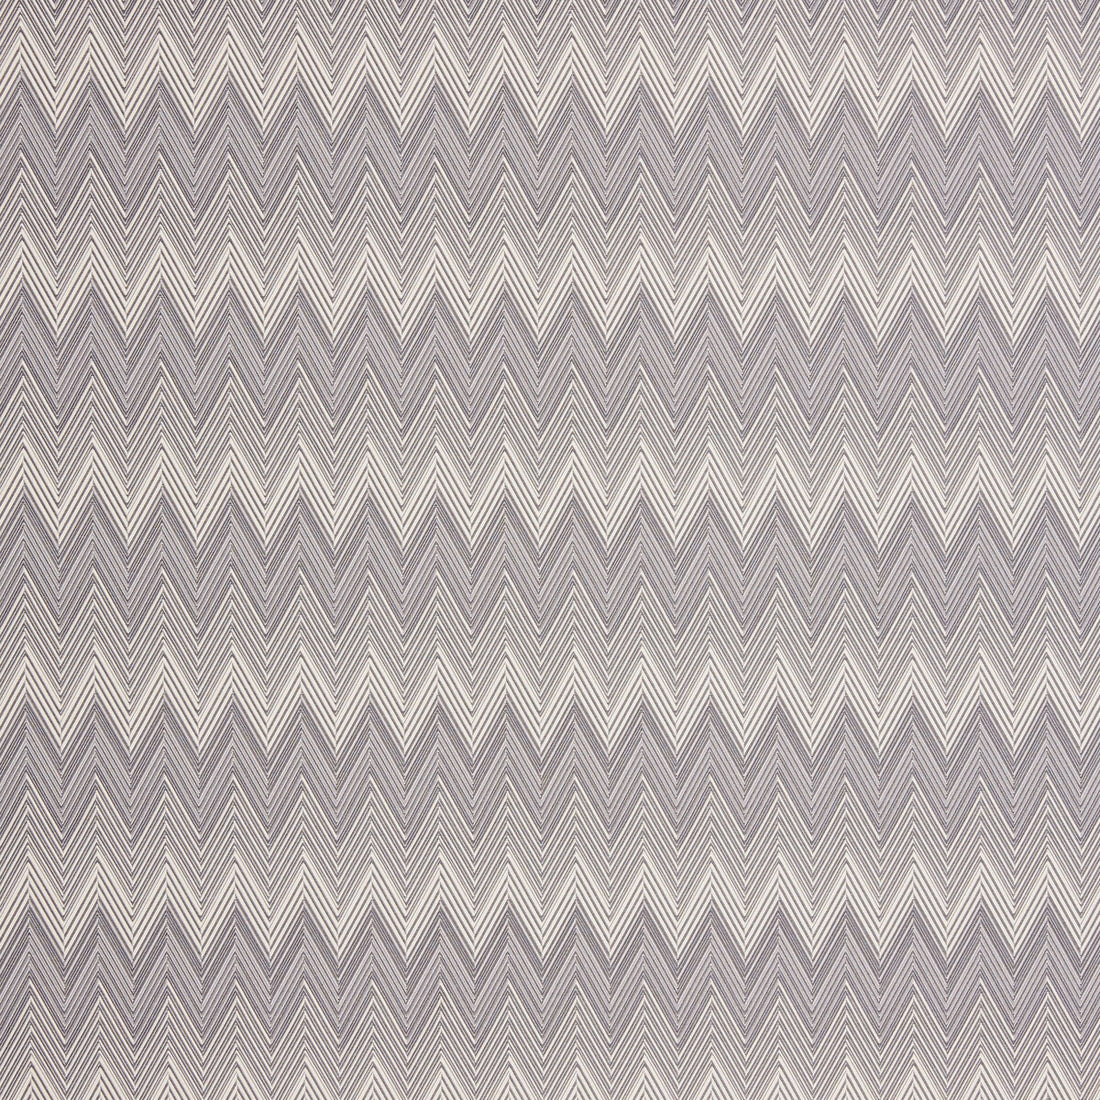 Brest Fr fabric in 861 color - pattern 36713.11.0 - by Kravet Couture in the Missoni Home collection